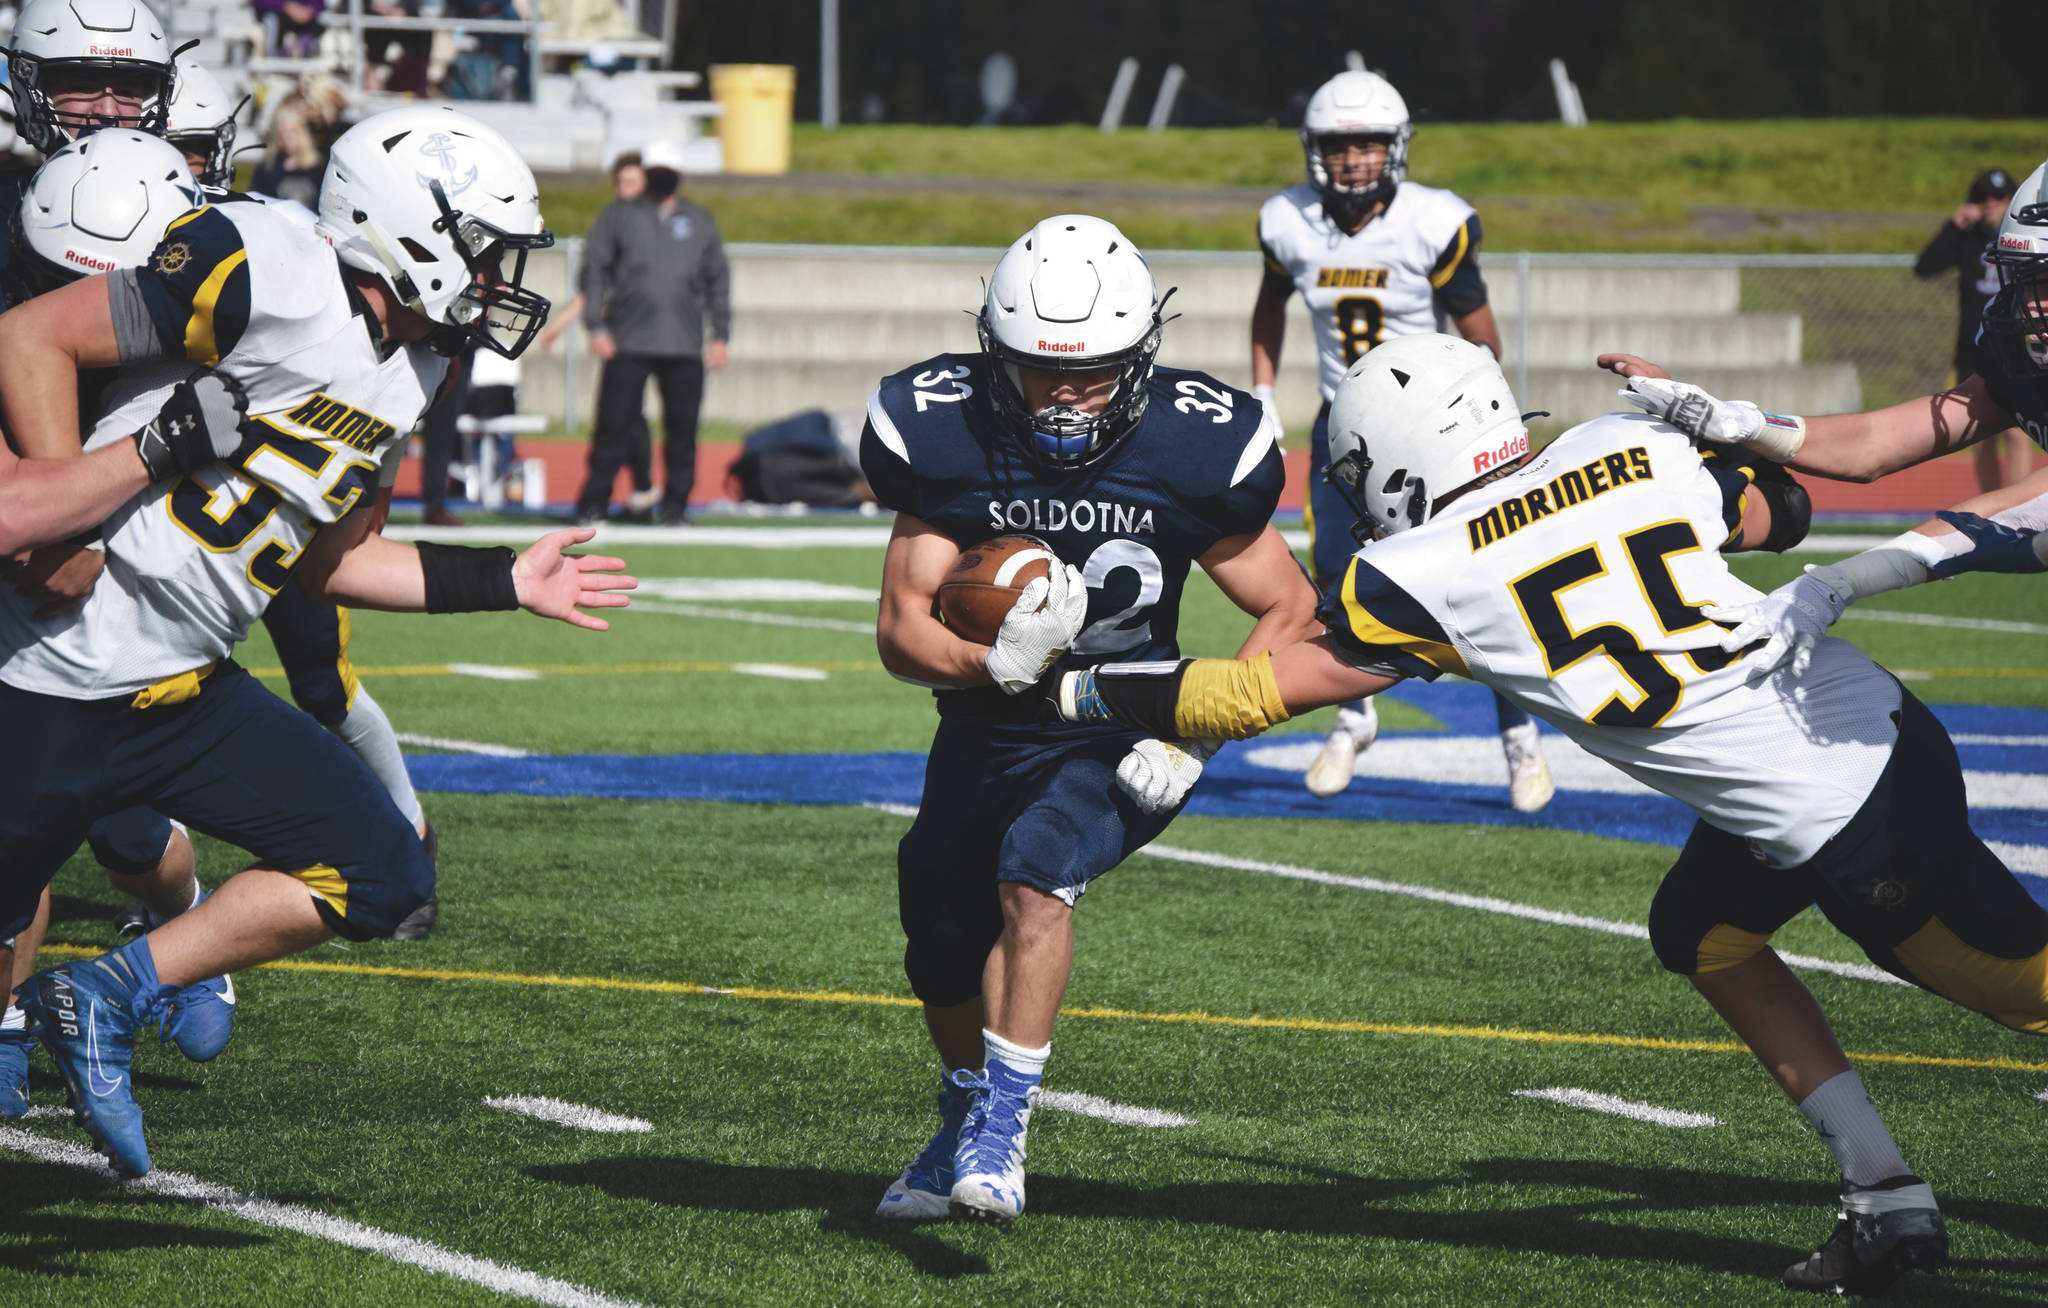 Homer’s Josh Manwiller and Dodge Petrosius converge on Soldotna’s Dennis Taylor on Saturday, Sept. 5, 2020, at Justin Maile Field at Soldotna High School in Soldotna, Alaska. (Photo by Jeff Helminiak/Peninsula Clarion)